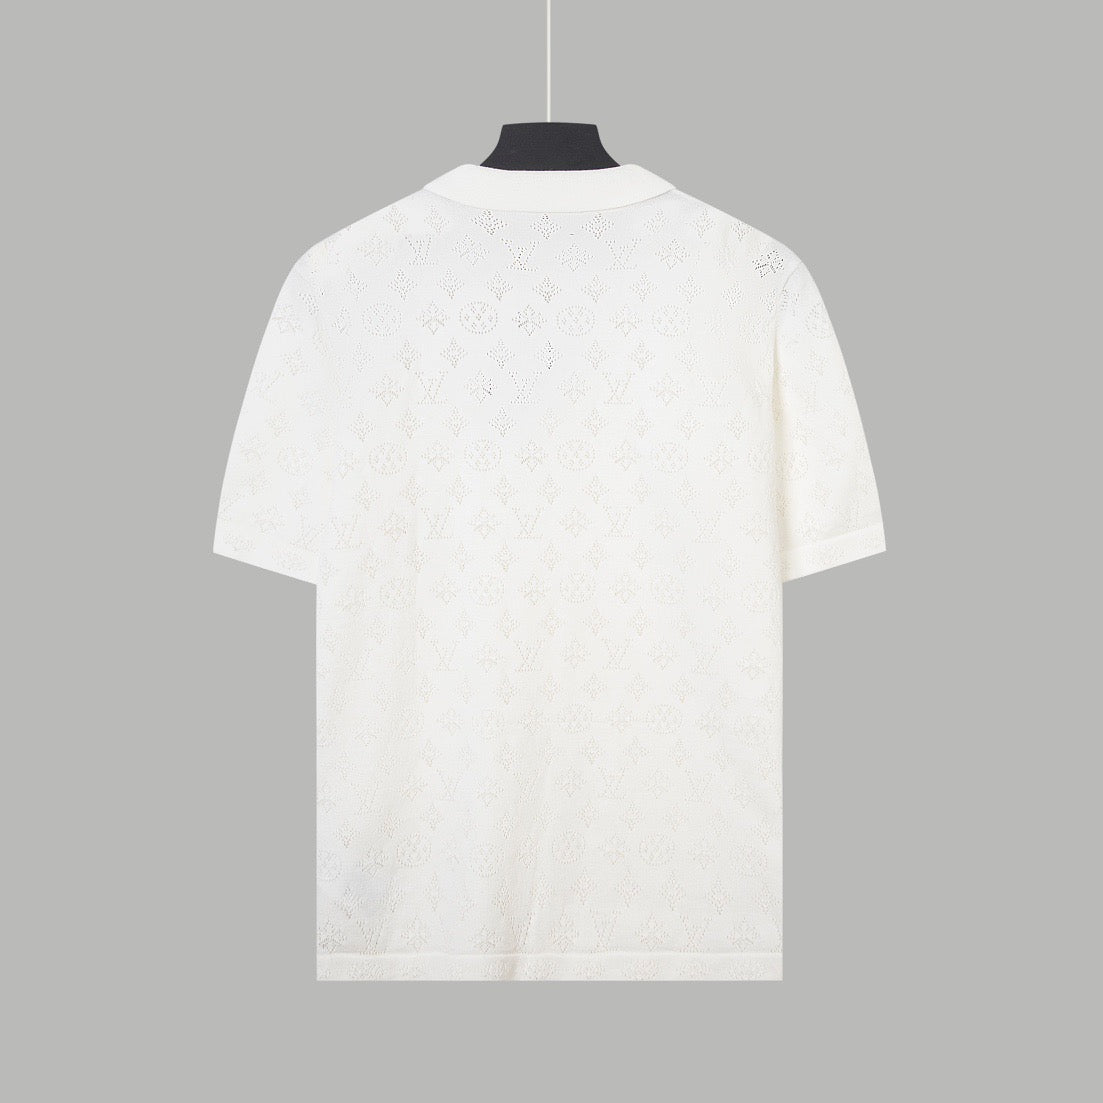 Limited edition cutout label knitted short sleeves